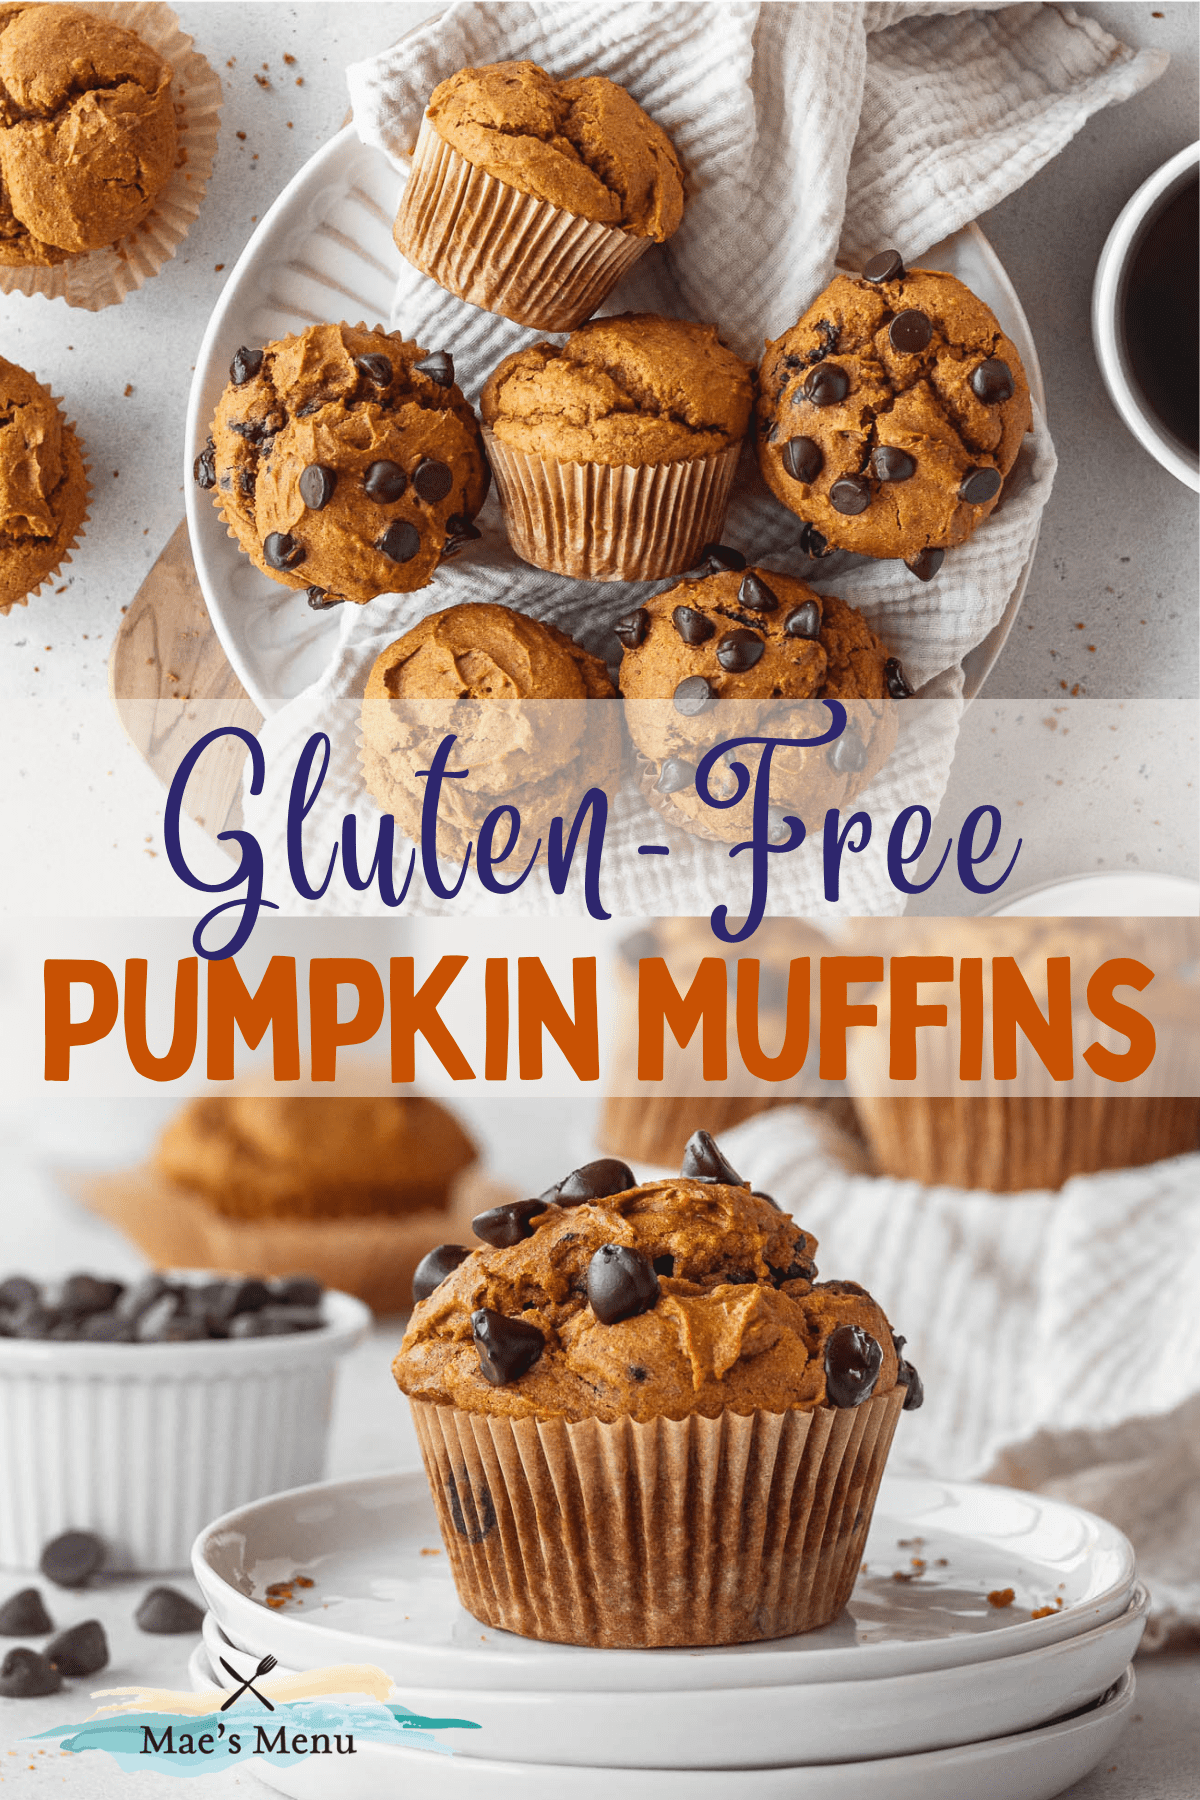 A pinterest pin for gluten free pumpkin muffins with an overhead shot of the muffins in a bowl plus a side shot of a pumpkin on a stack of plates.